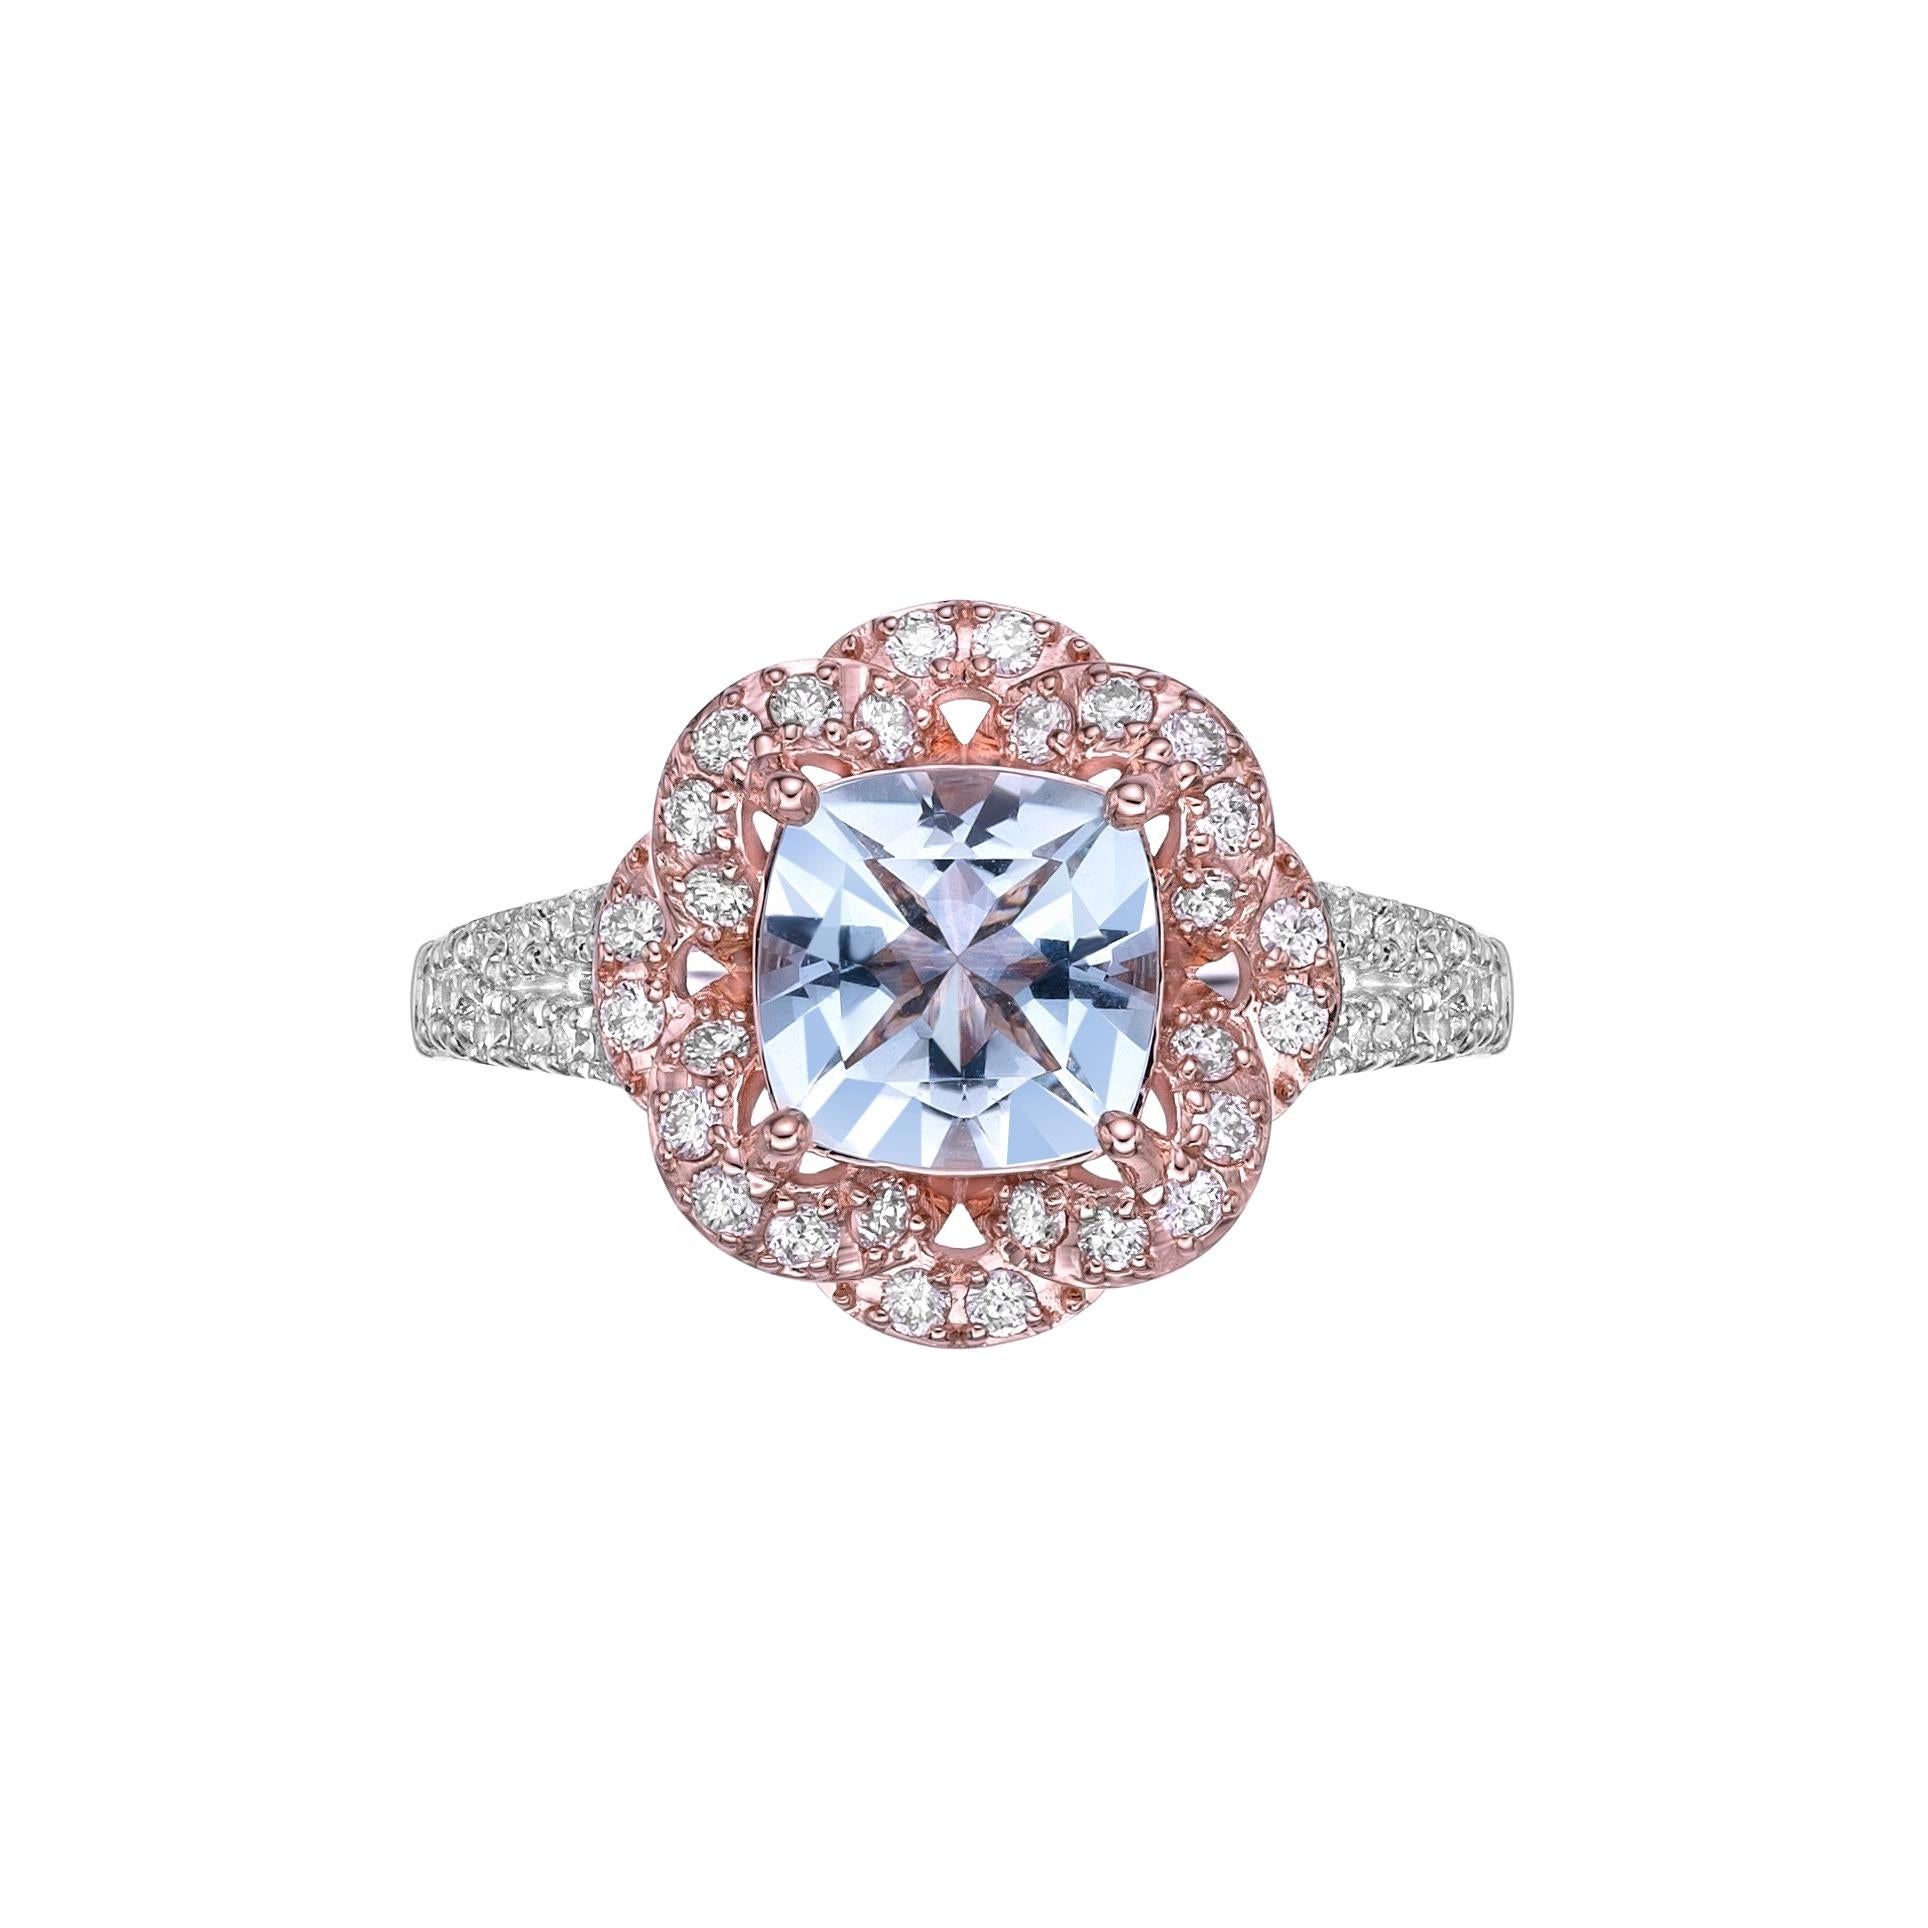 Contemporary 1.16 Carat Aquamarine Fancy Ring in 18Karat White Rose Gold with Diamond.   For Sale